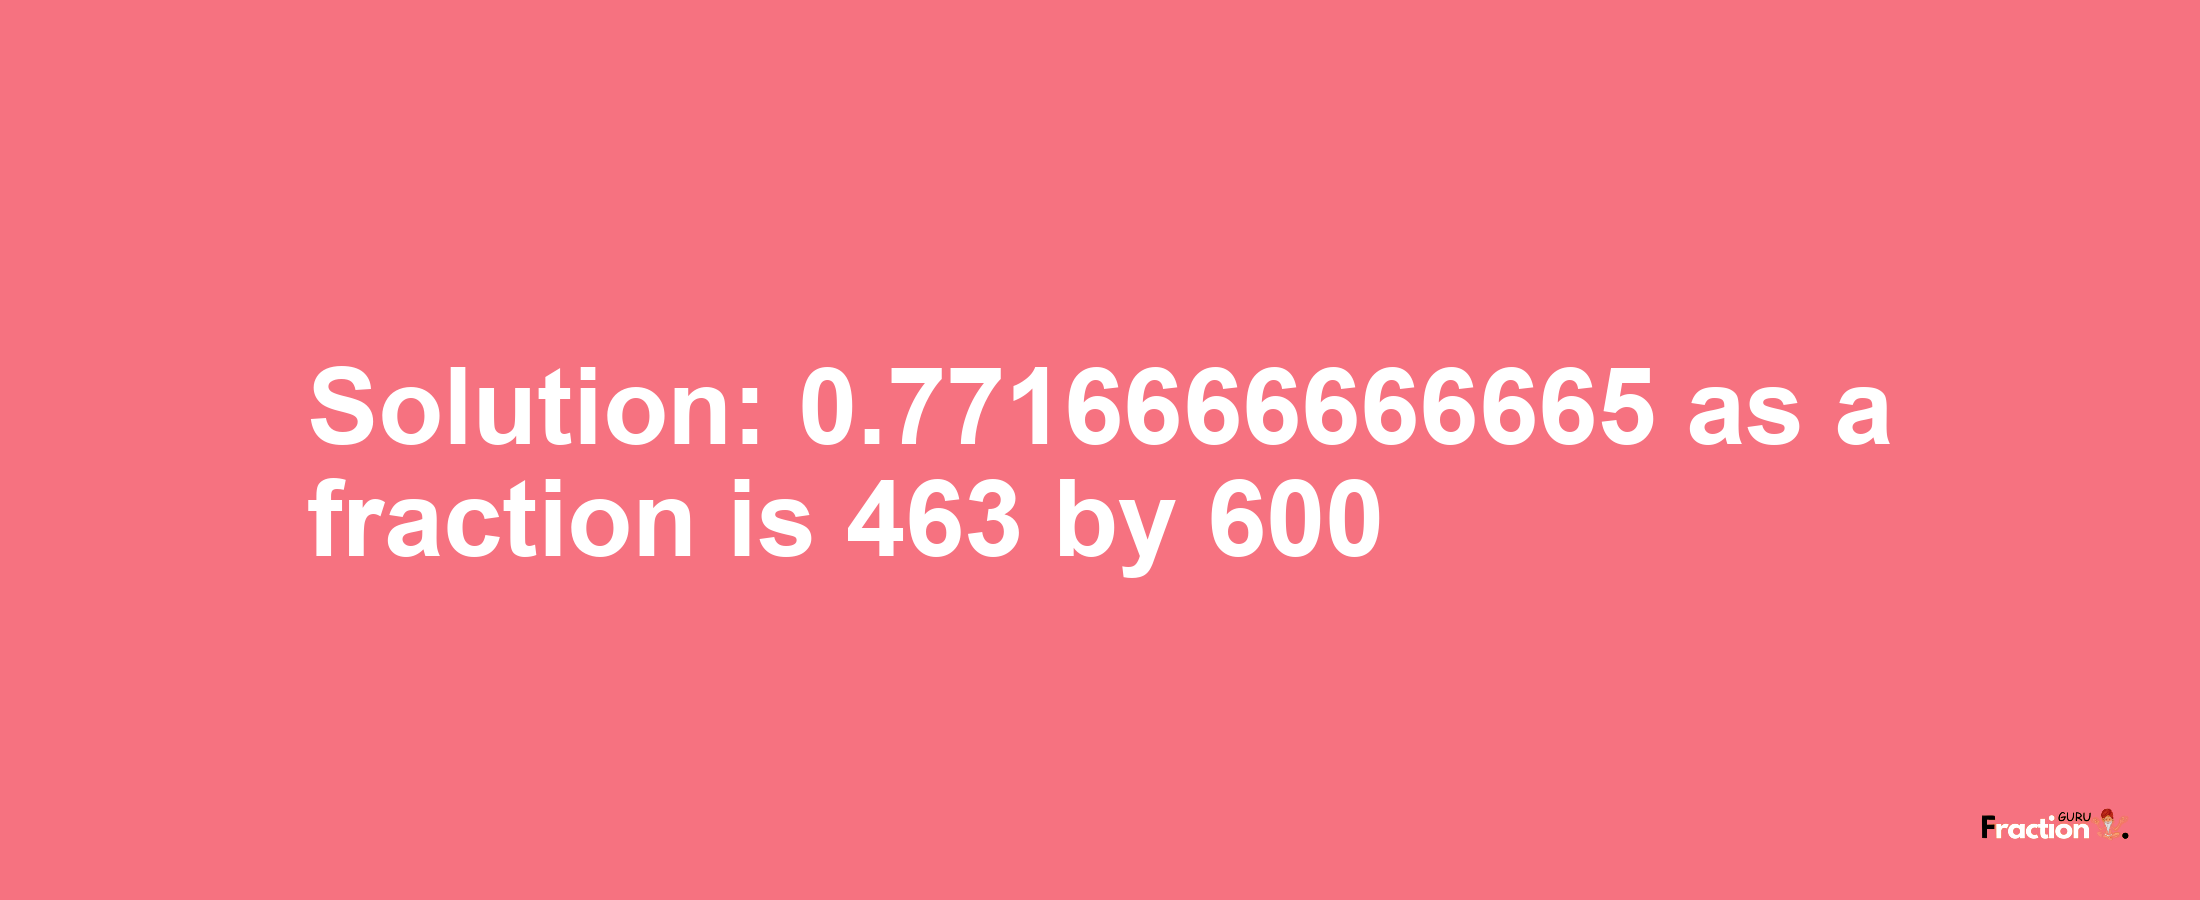 Solution:0.7716666666665 as a fraction is 463/600